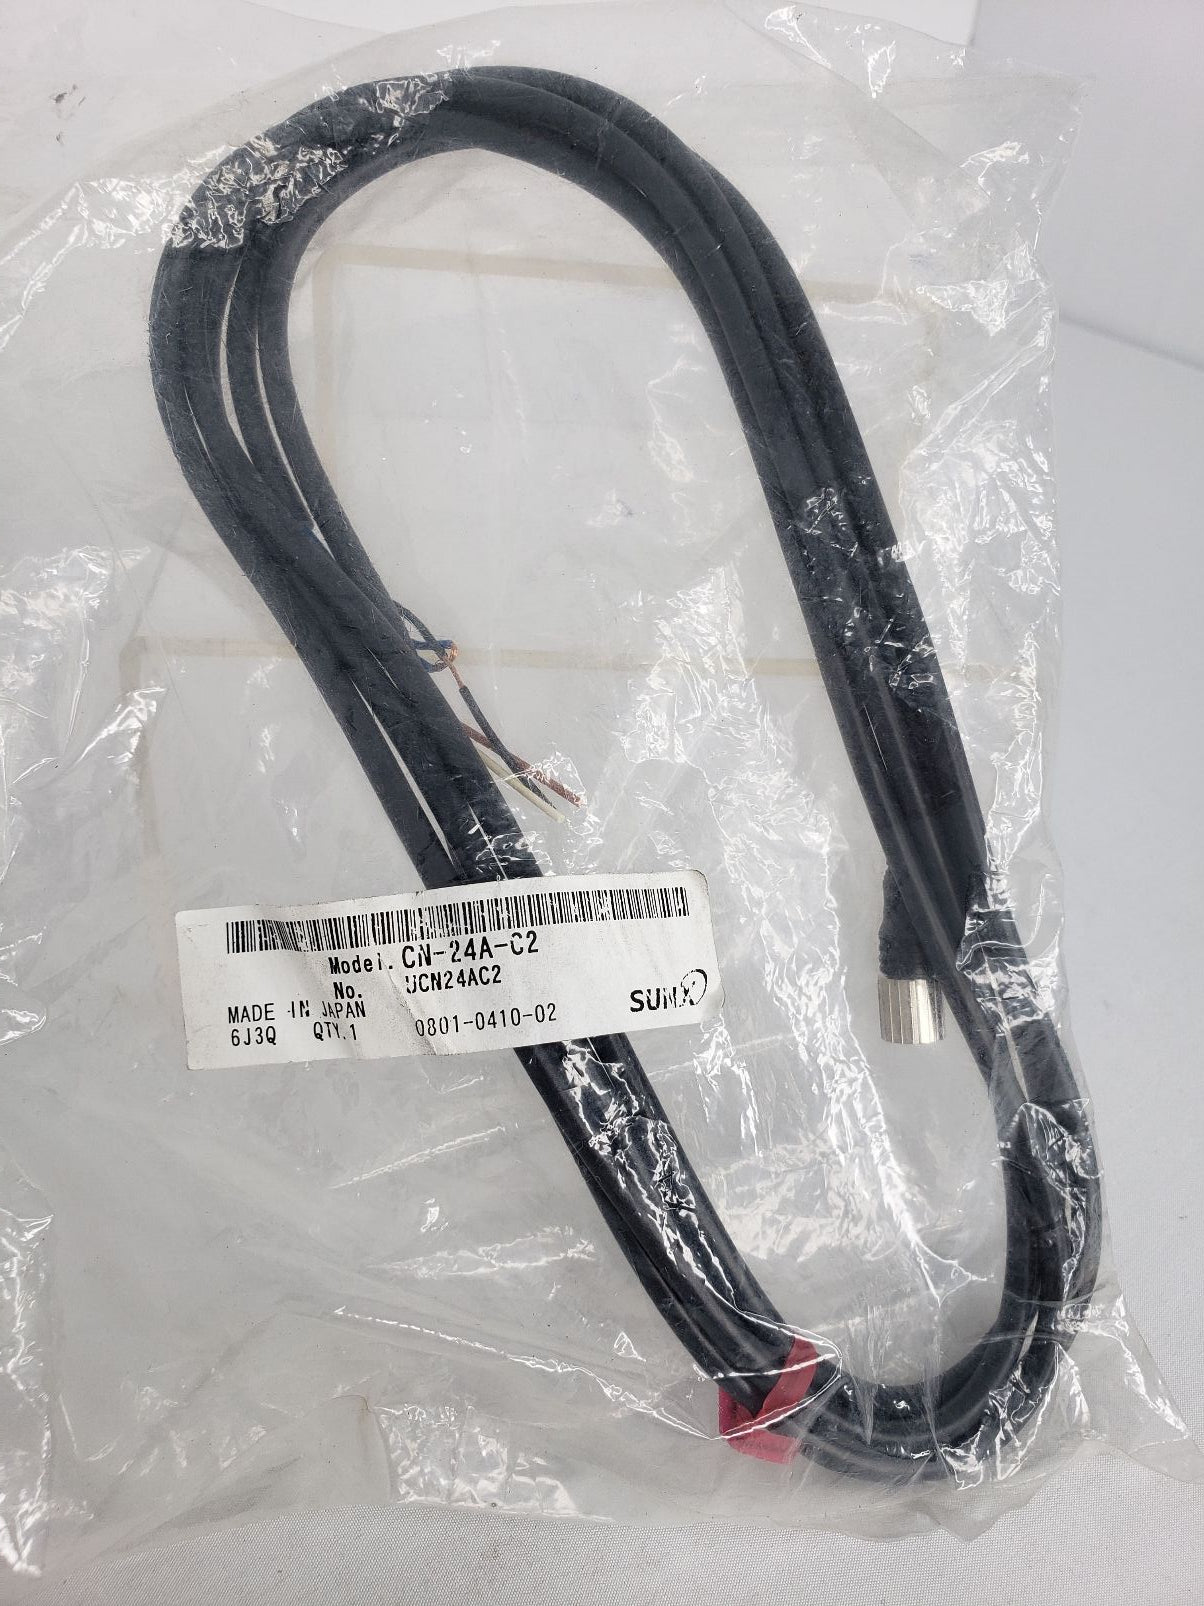 Panasonic CN-24A-C2 M8 4-Pin 2m Female Cable & Connector for use with CX-400 Series